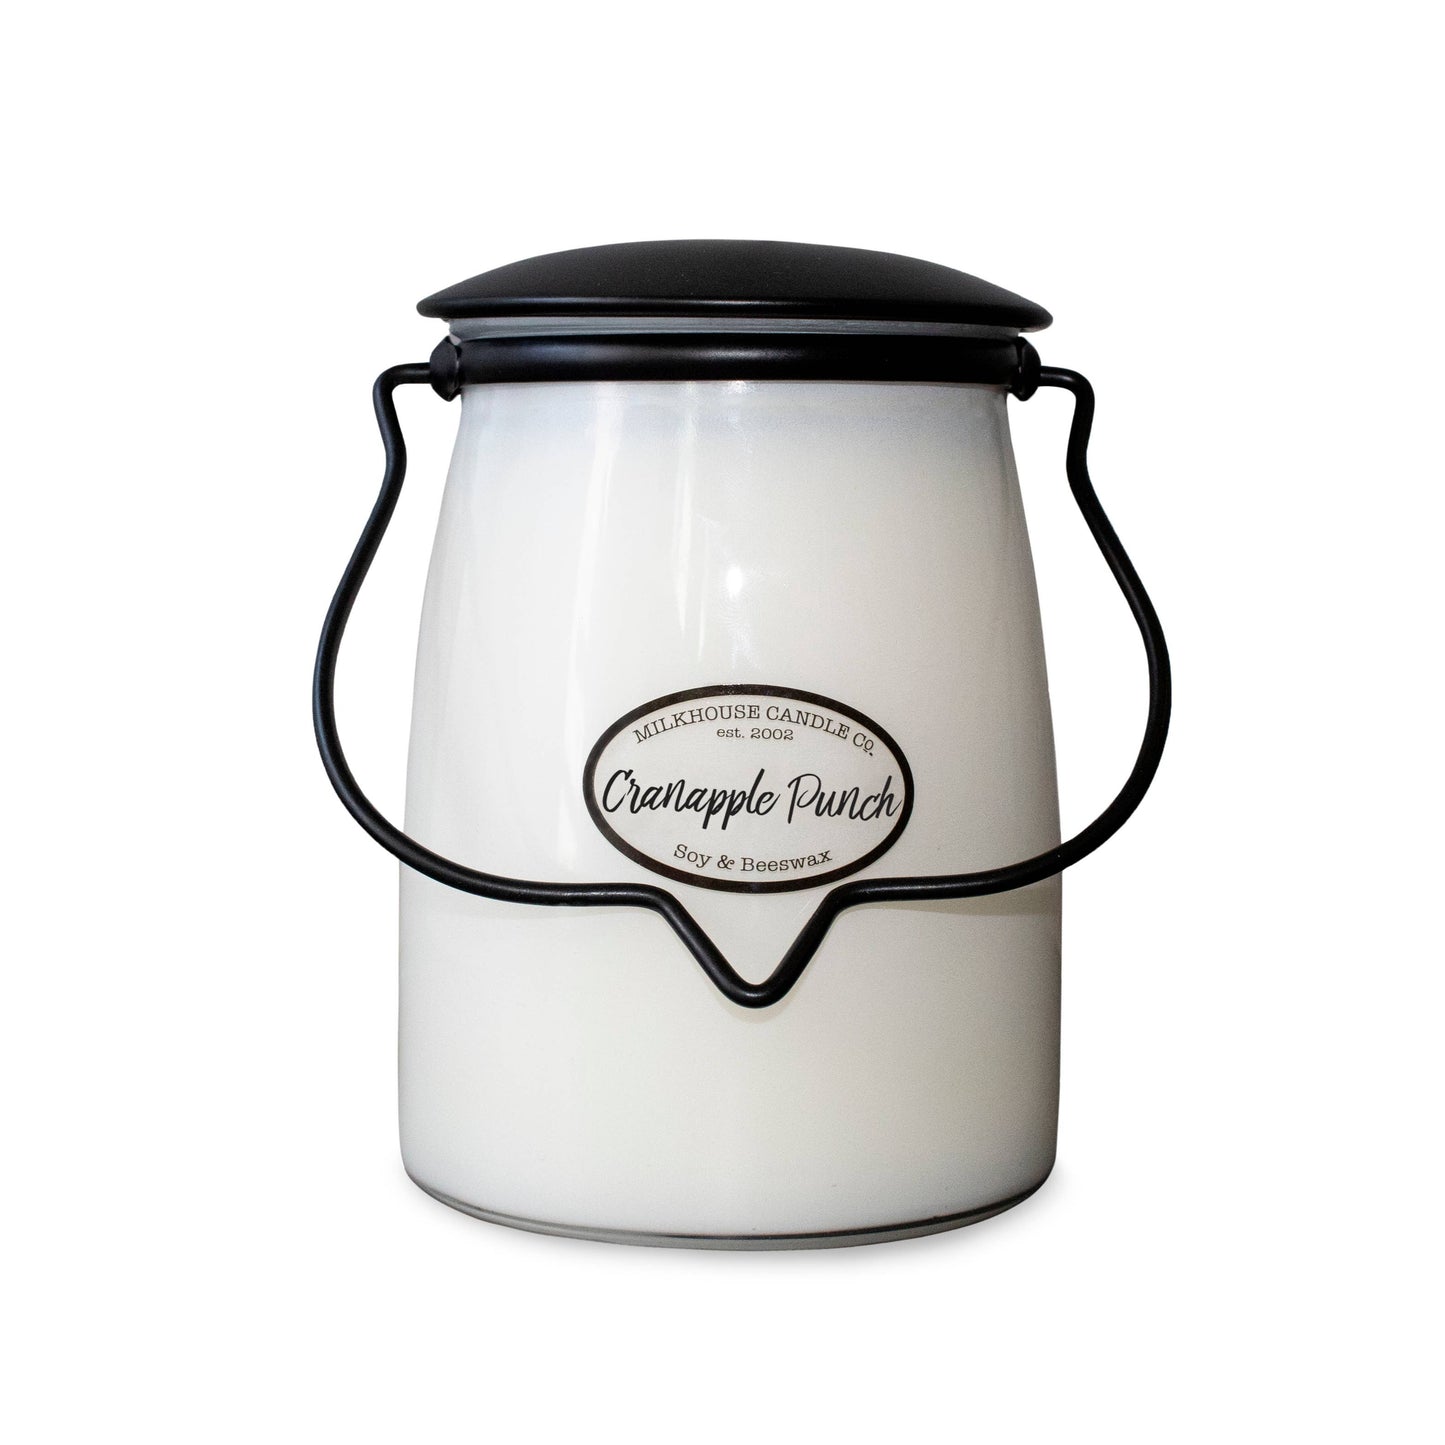 Milkhouse Candle Company 22oz. Butter Jar Candles